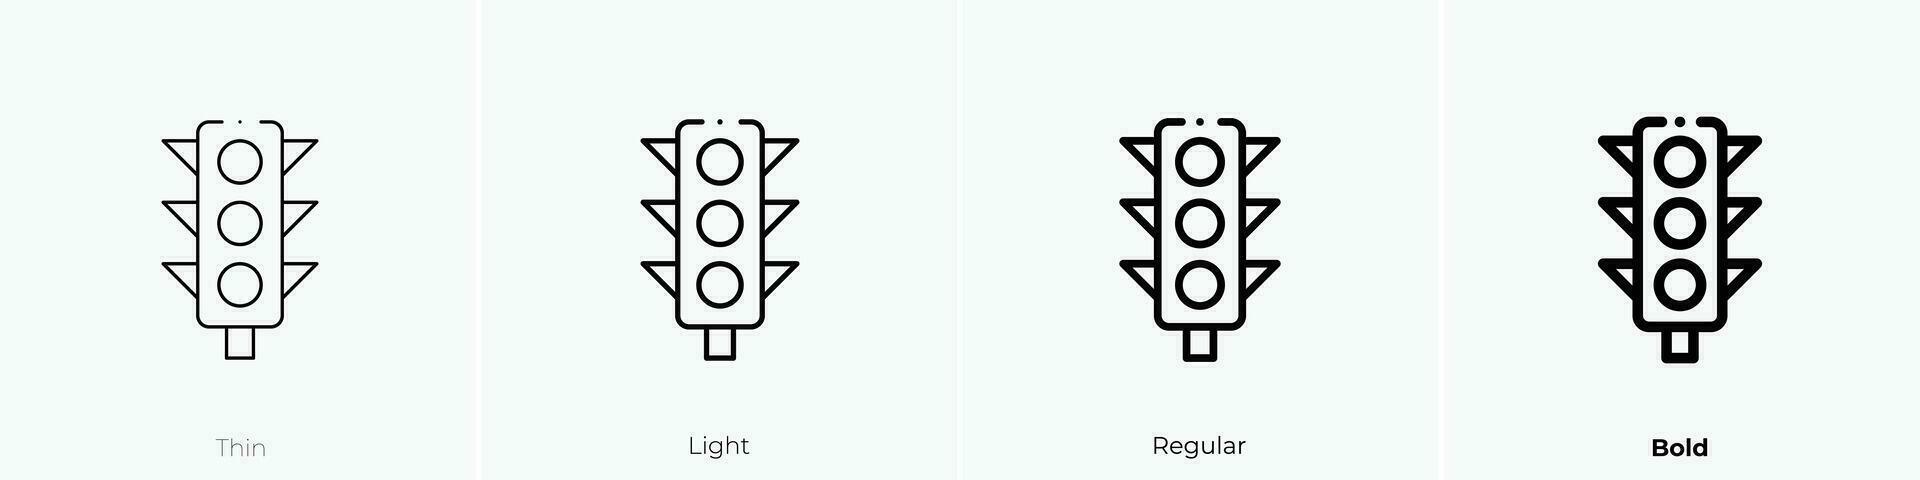 traffic light icon. Thin, Light, Regular And Bold style design isolated on white background vector